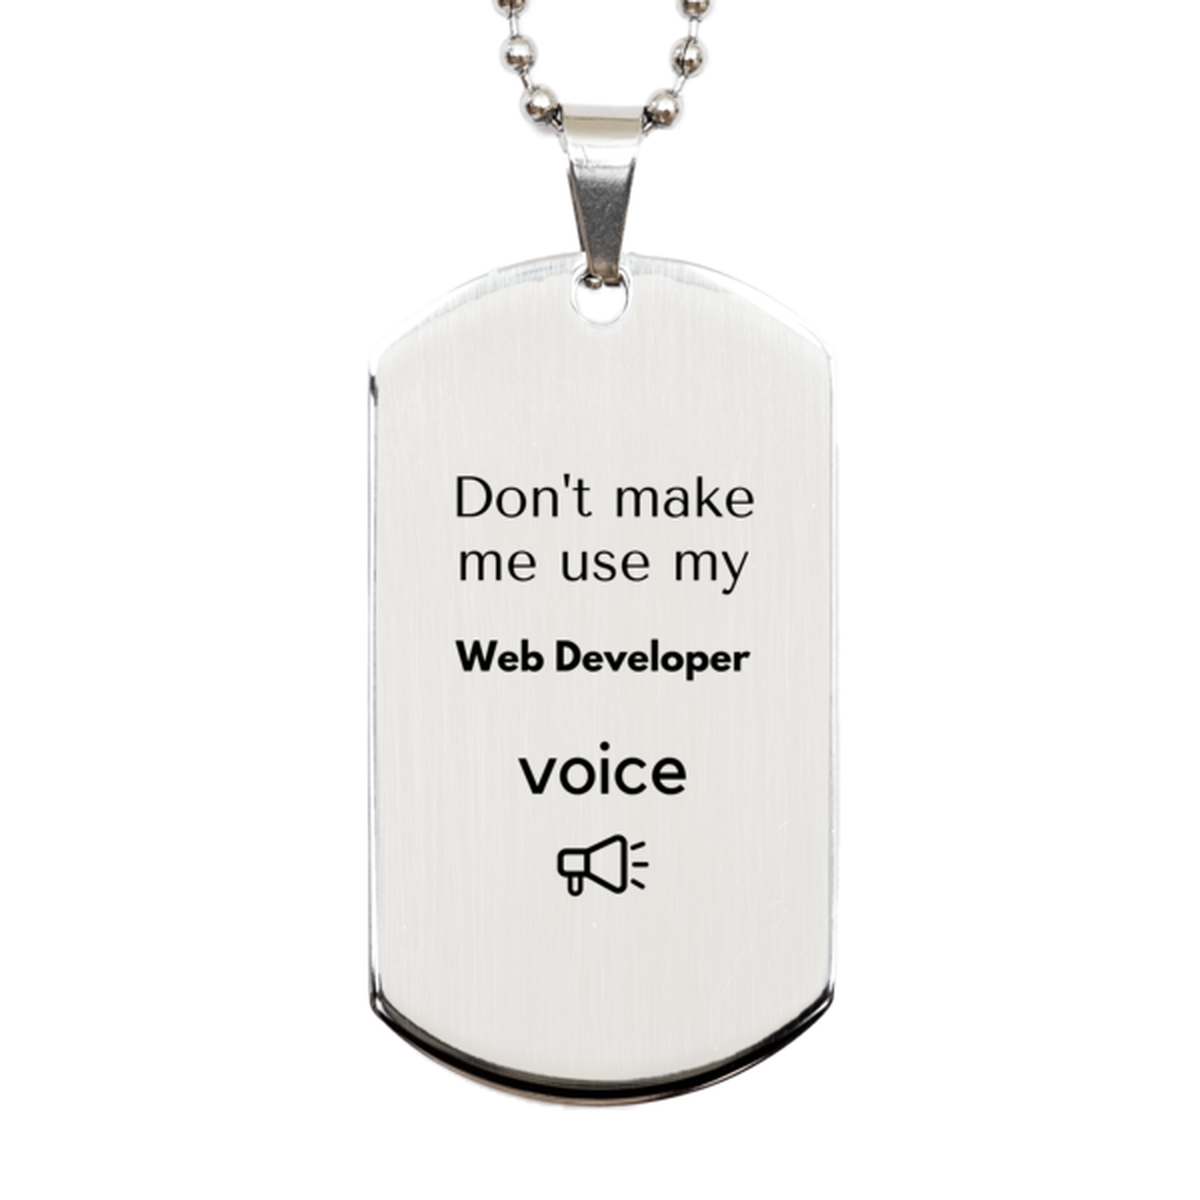 Don't make me use my Web Developer voice, Sarcasm Web Developer Gifts, Christmas Web Developer Silver Dog Tag Birthday Unique Gifts For Web Developer Coworkers, Men, Women, Colleague, Friends